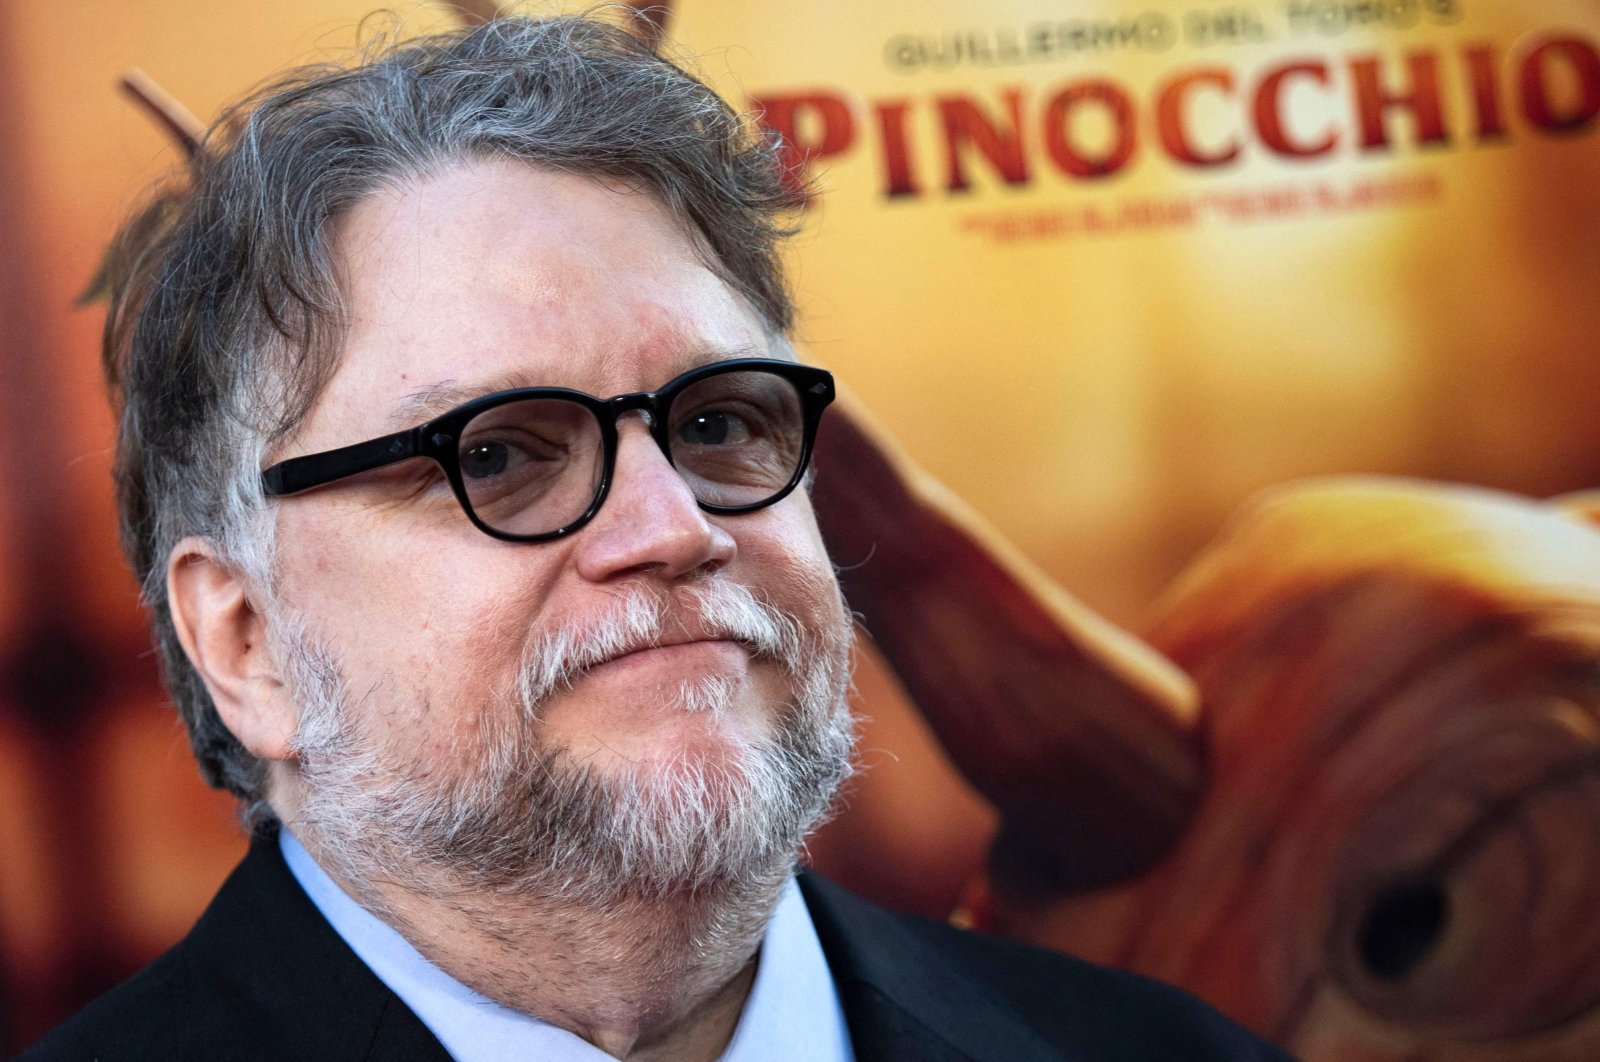 Mexican director Guillermo del Toro arrives for the premiere of &quot;Pinocchio&quot; during the 2022 American Film Institute Festival at the TCL Chinese Theatre in Hollywood, California, U.S., Nov. 5, 2022. (AFP Photo)